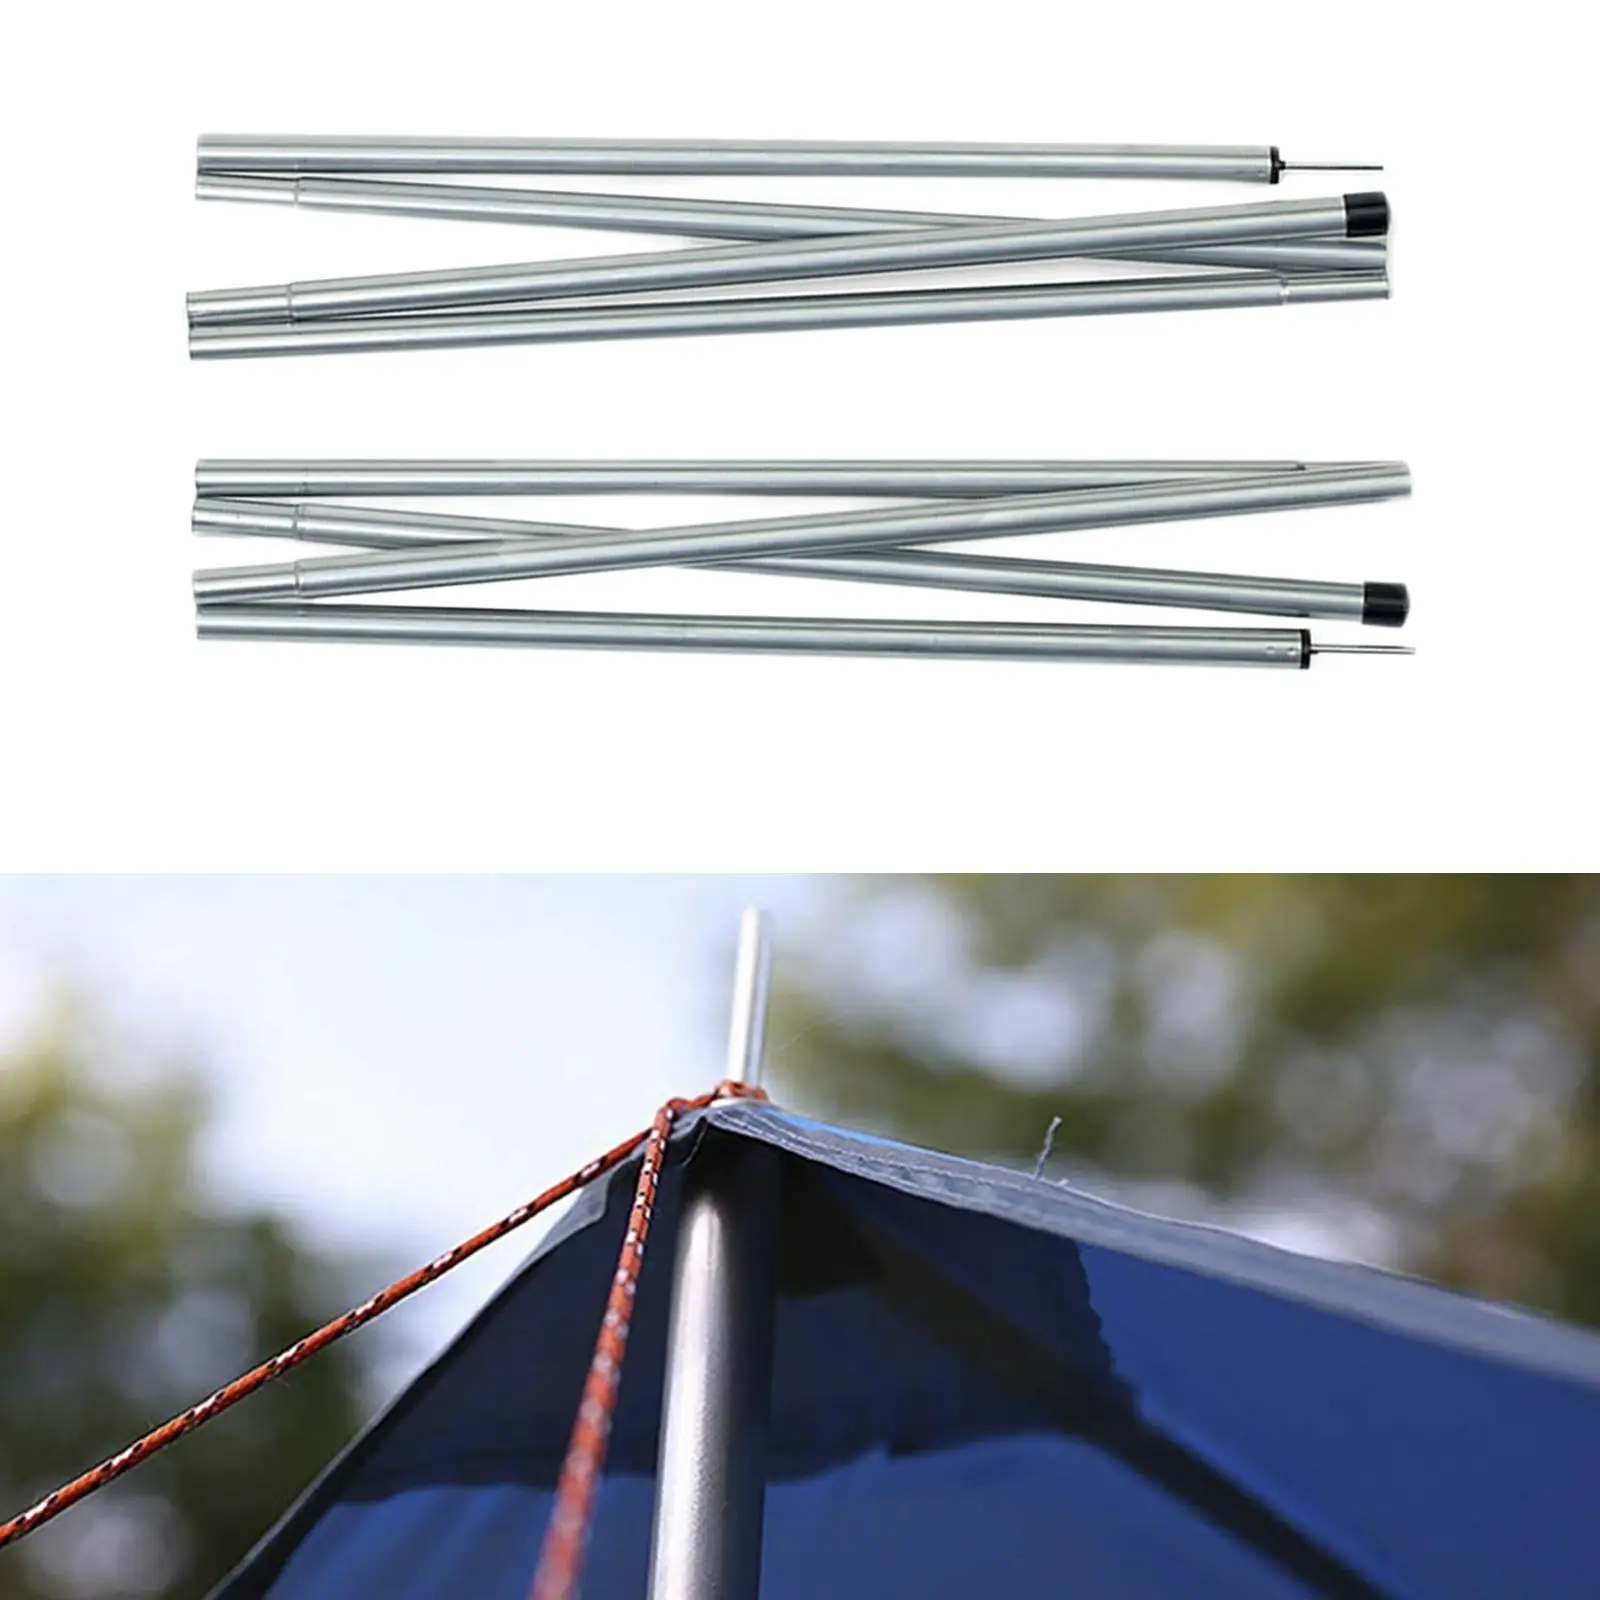 8x Telescopic Tent Tarp Poles Camping 55cm Hammocks Holder Awning Support Replacement Rod Stick Bar for Canopy Tent Fly Rainfly